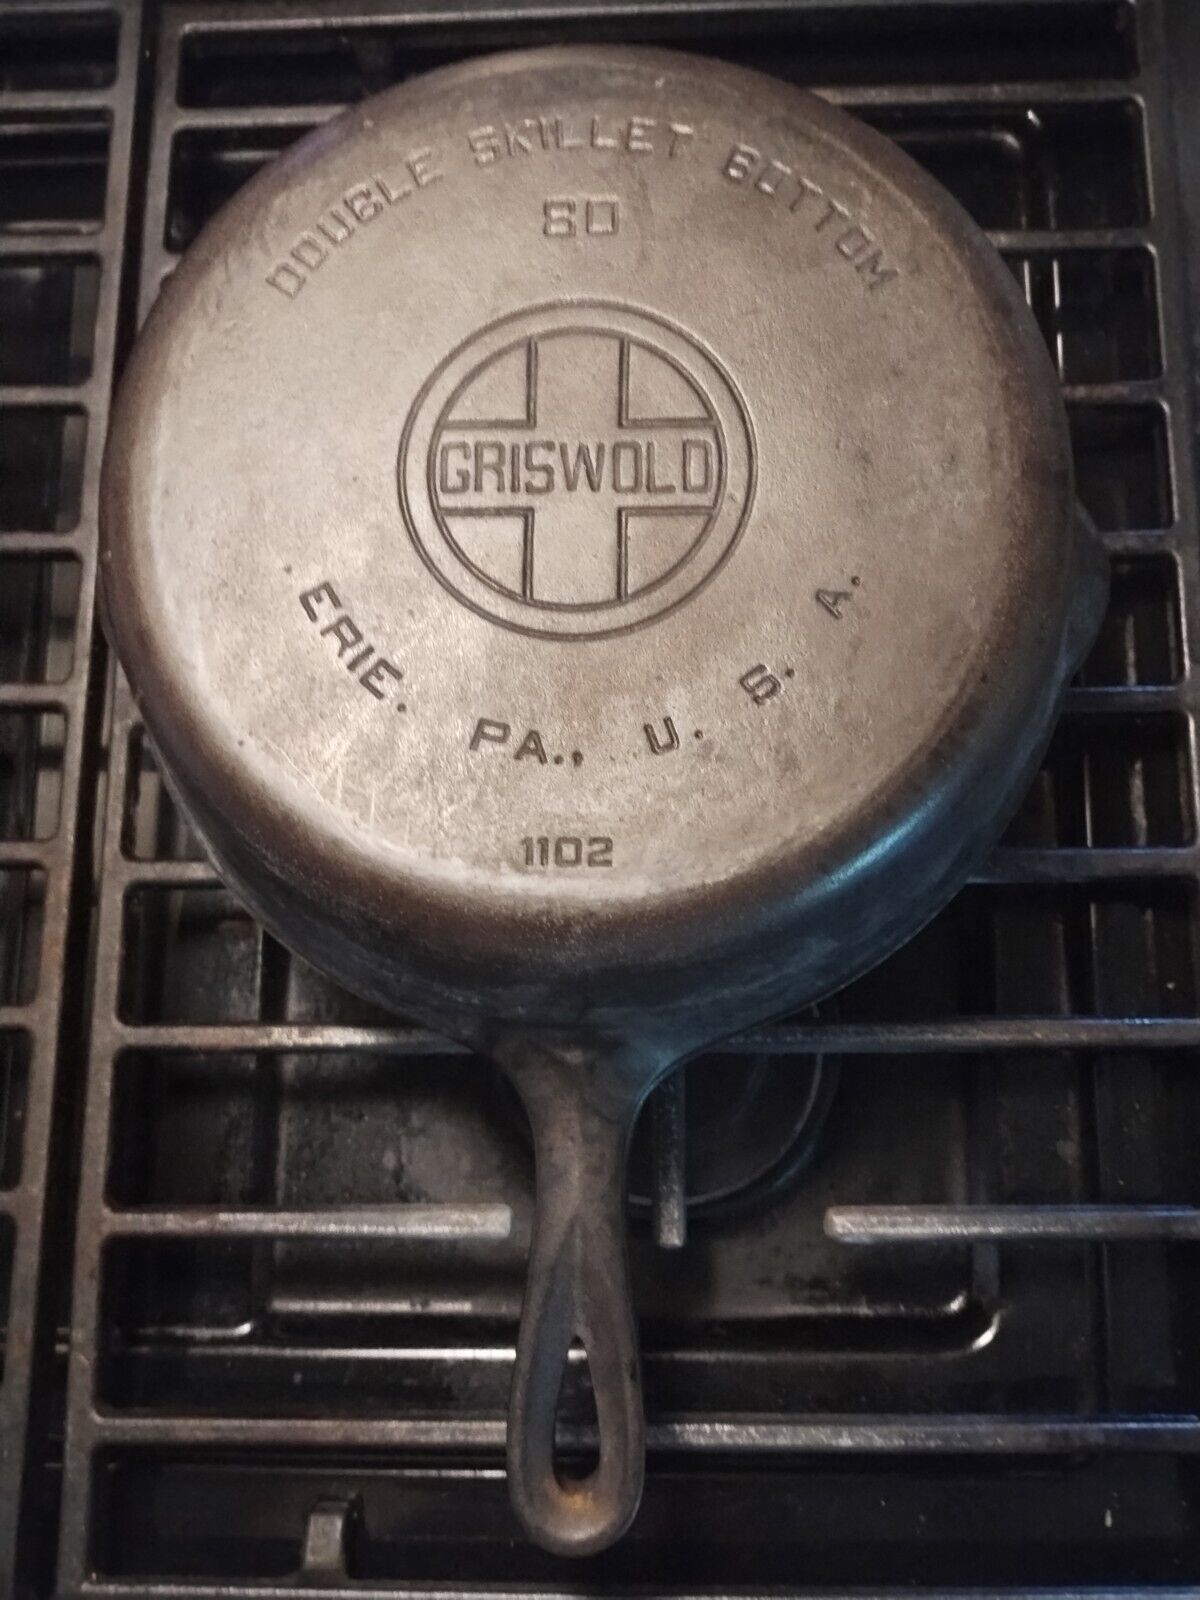 Griswold 80 Cast Iron Double Hinged Skillet Pan Large Block Logo 1102-3 Flat 